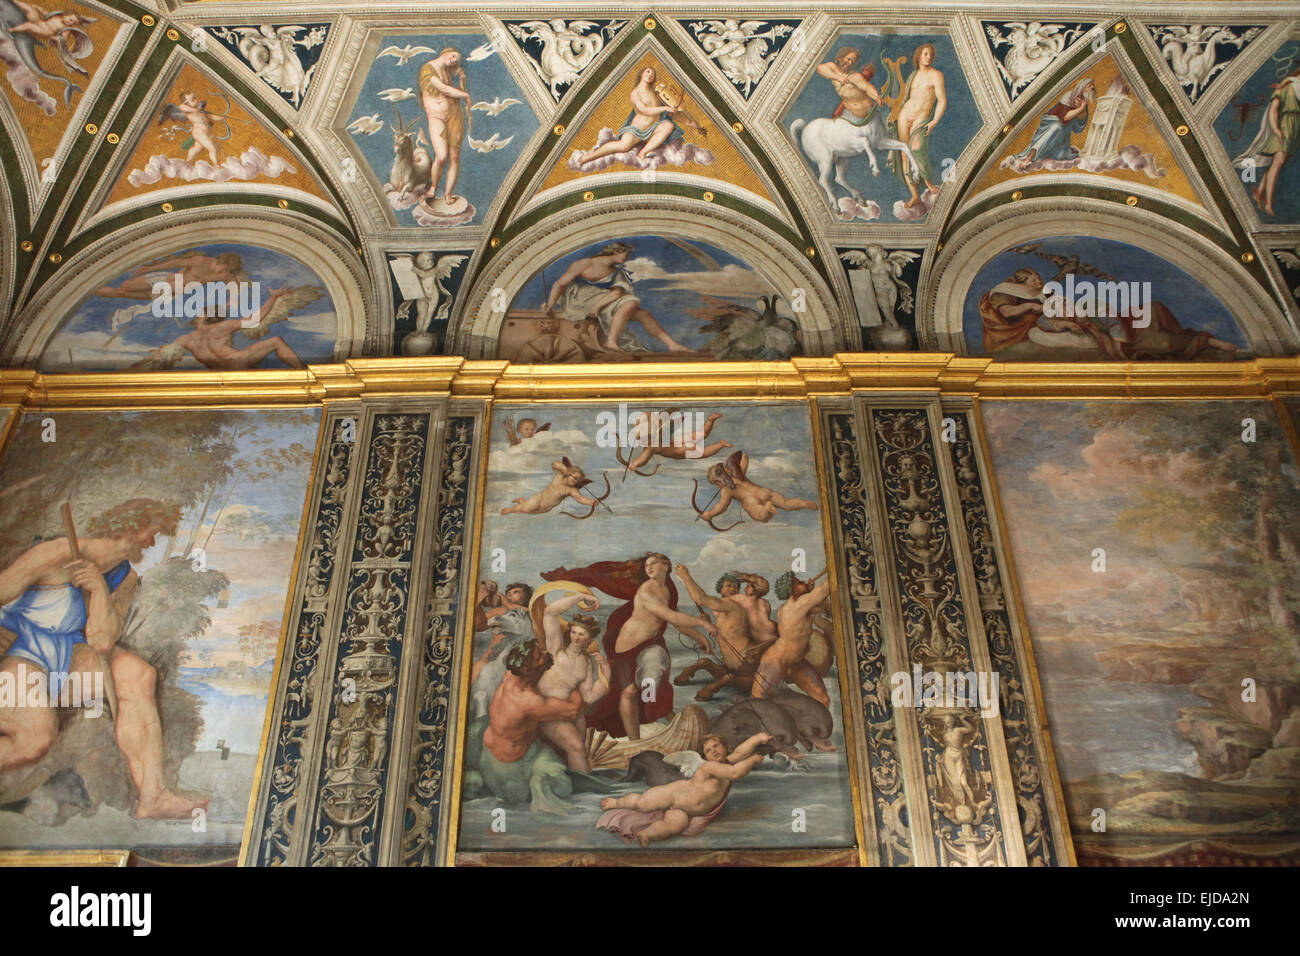 Triumph of Galatea. Fresco by Raphael at the Loggia of Galatea in the Villa Farnesina in Rome, Italy. Fresco Polyphermus (L) and lunettes by Sebastiano del Piombo and ceiling painting by Baldassarre Peruzzi are seen in the photo. Stock Photo